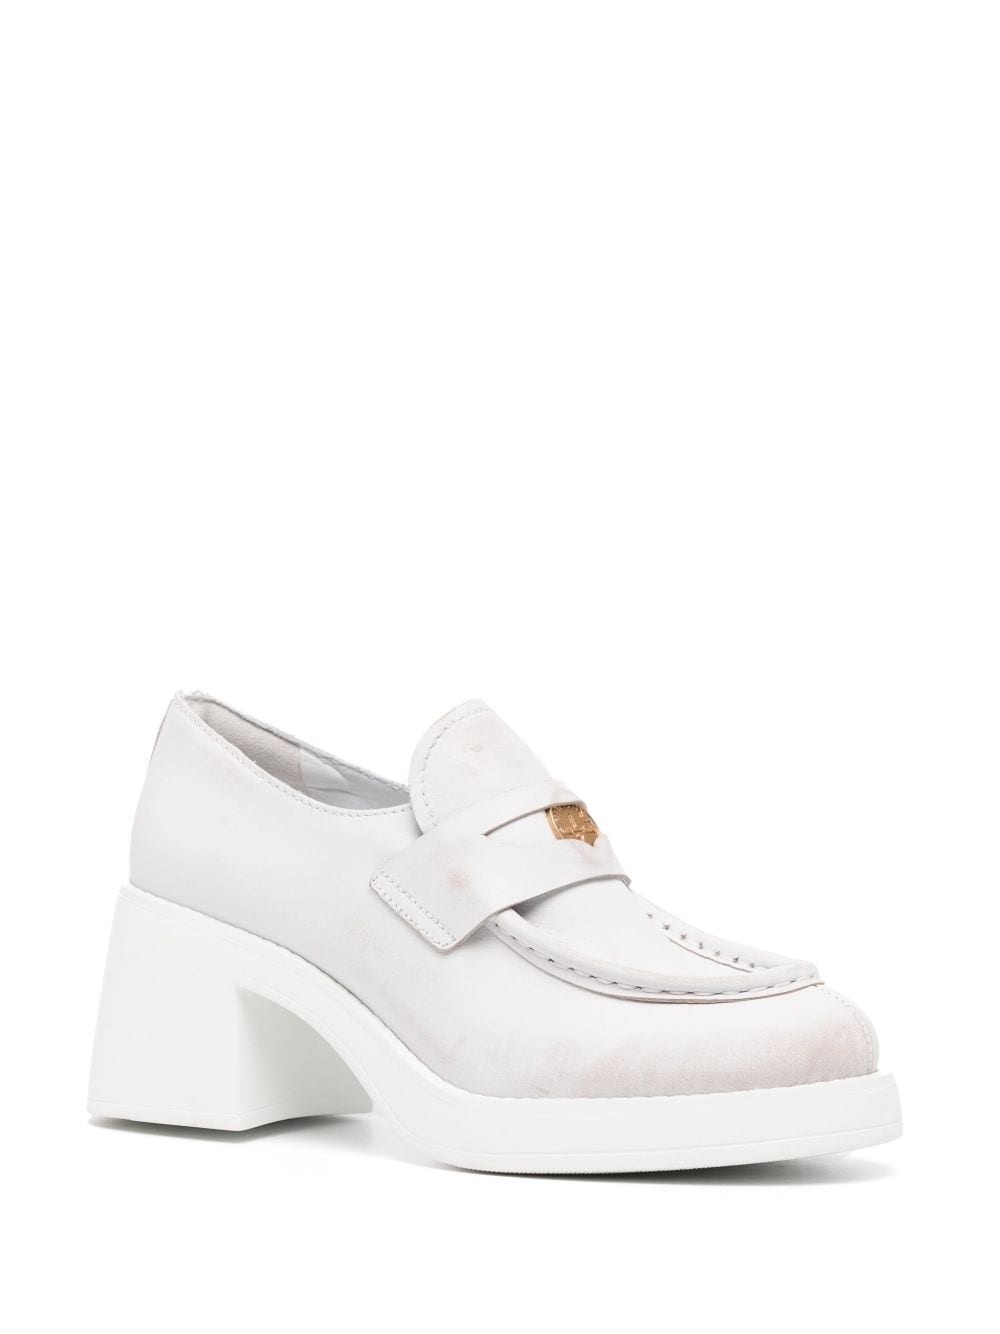 Miu Miu 70mm leather penny loafers | REVERSIBLE